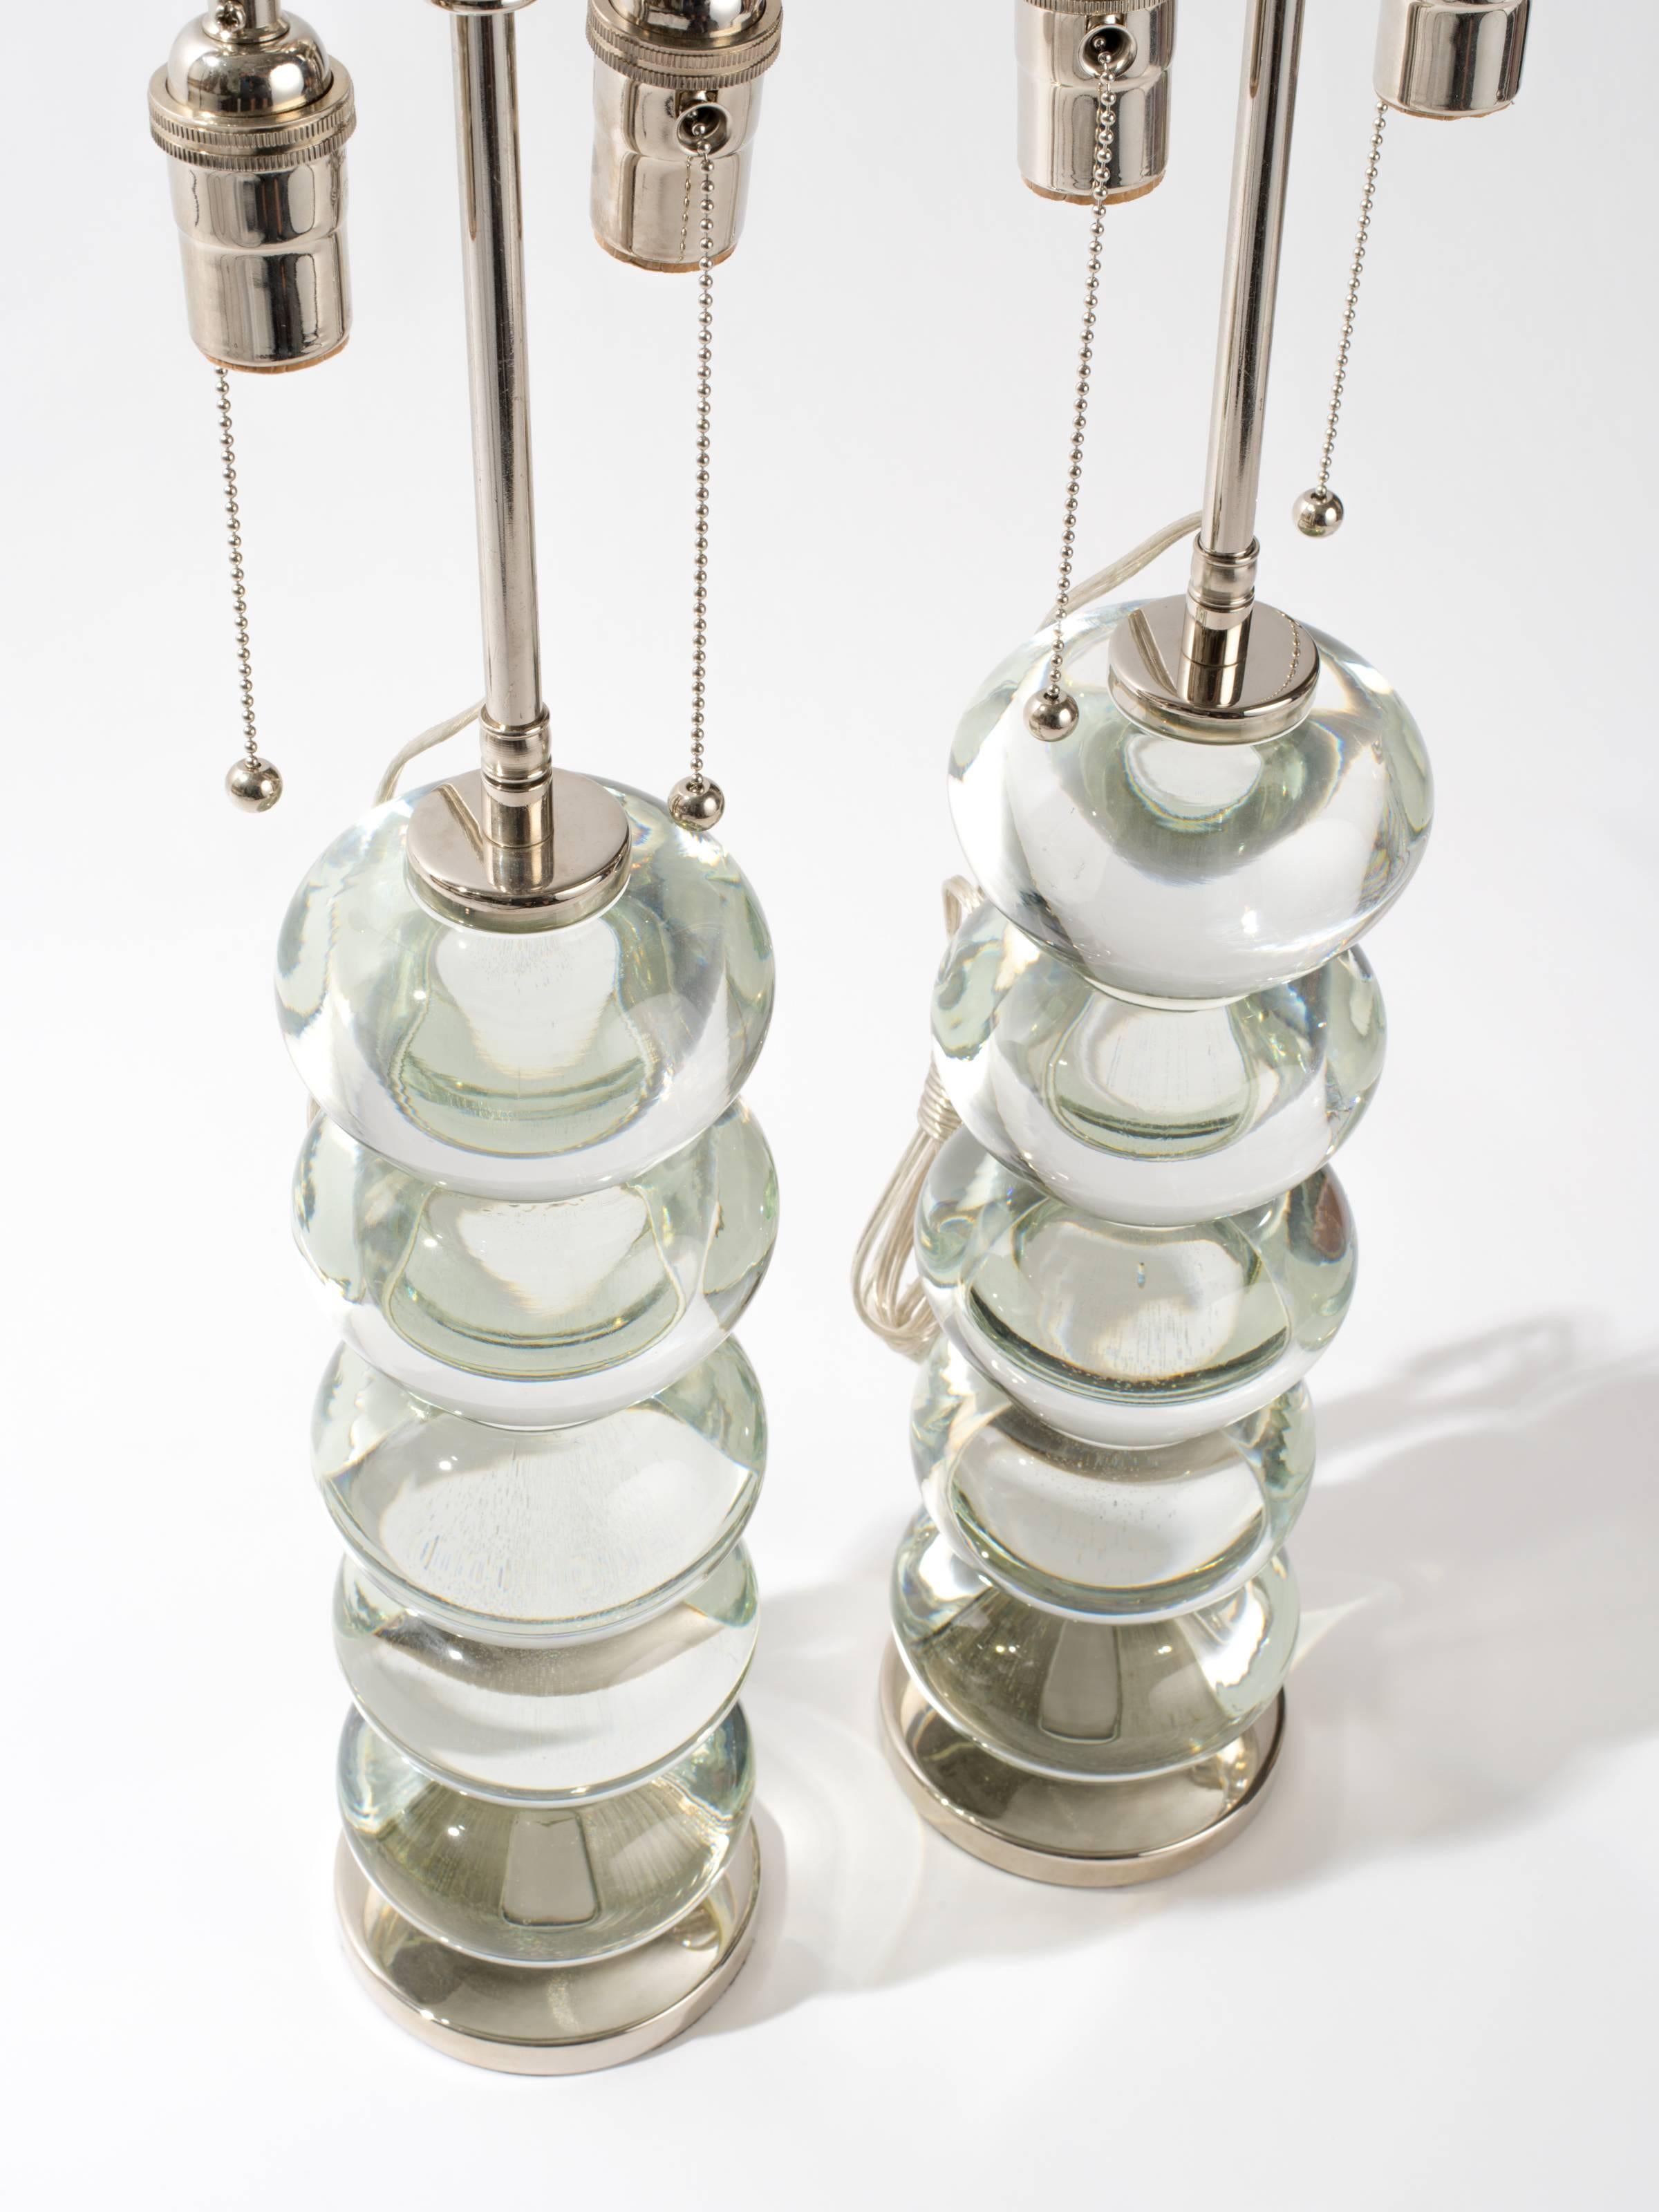 Contemporary Sculpture Amorphic Solid Glass Lamps For Sale